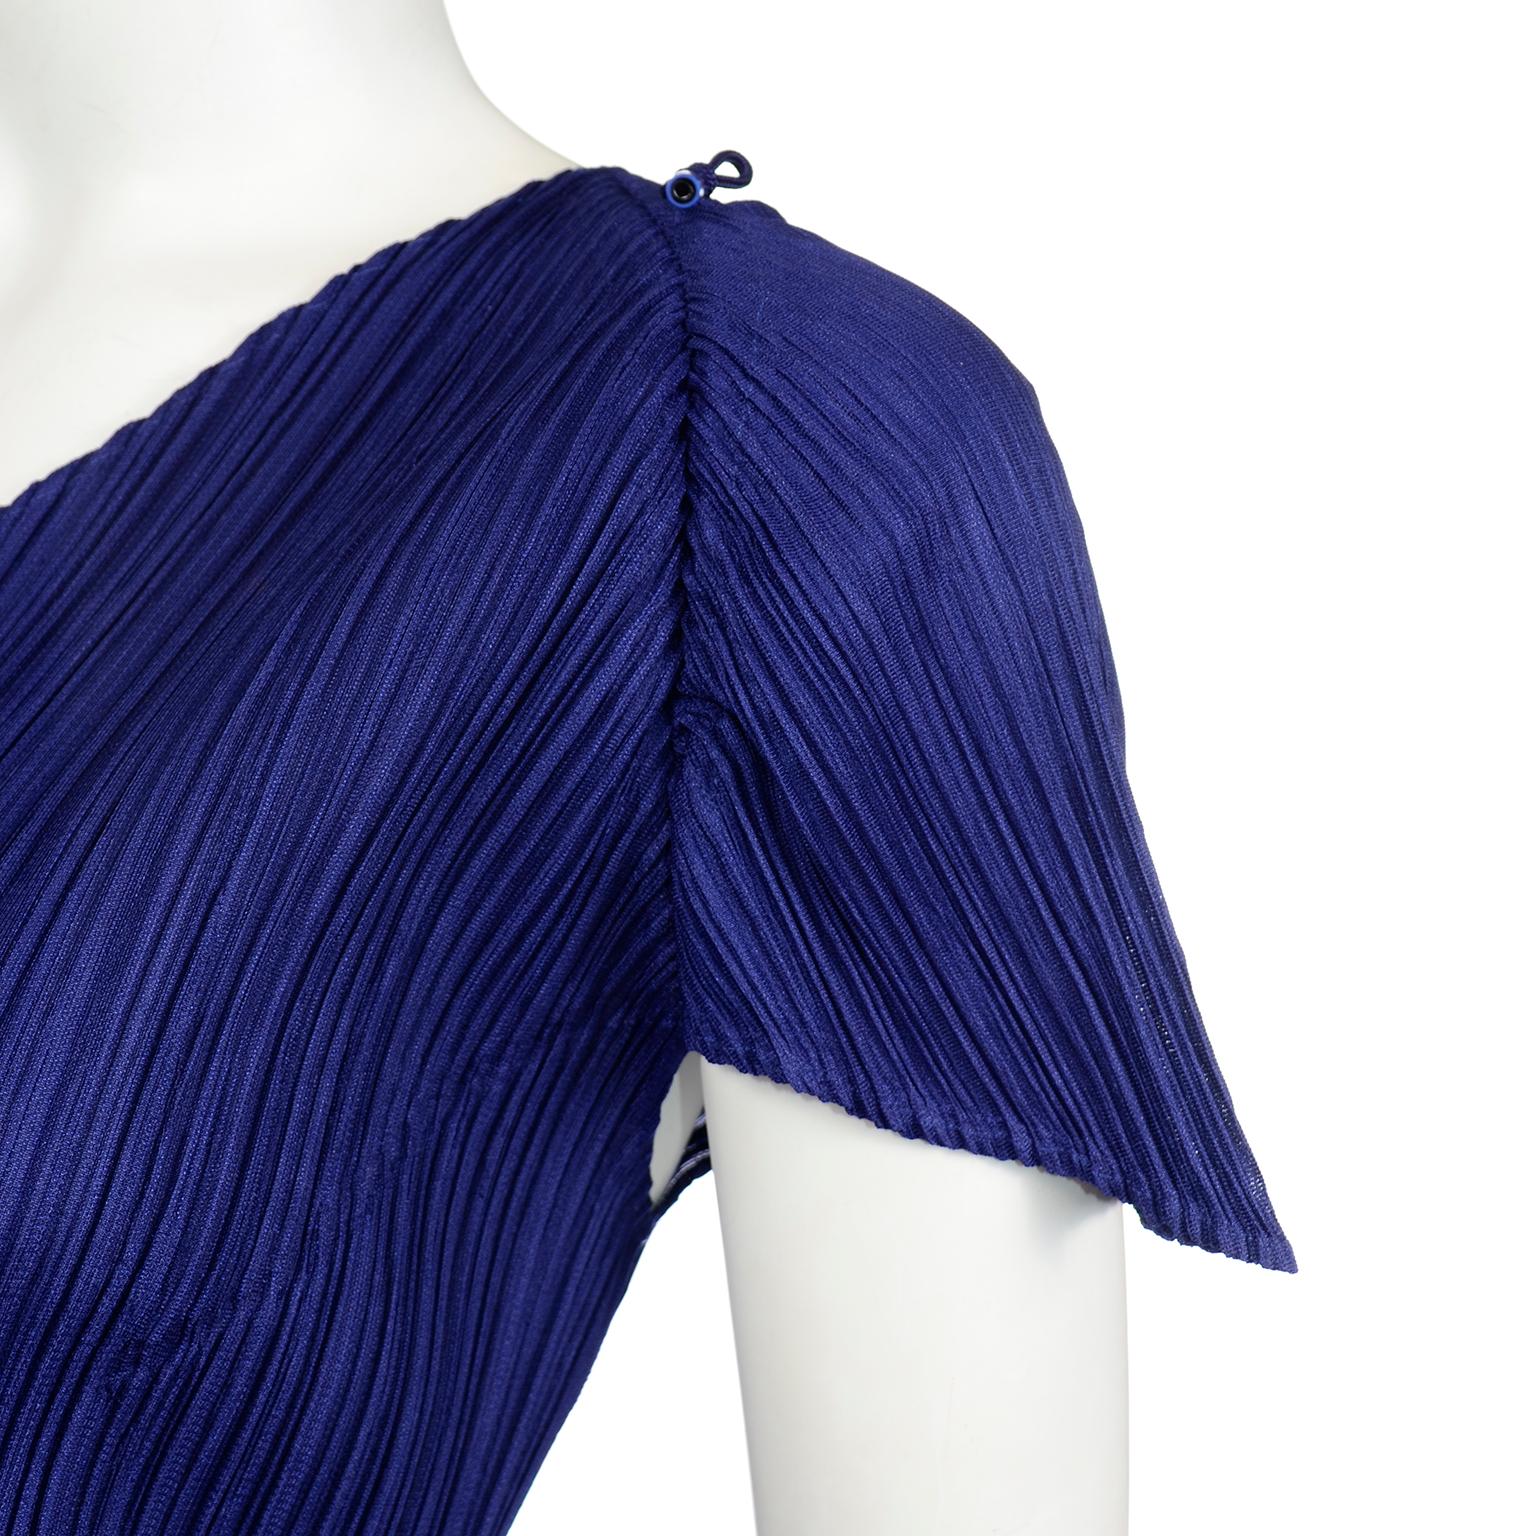 Issey Miyake Pleats Please Blue Dress & Ombre Jacket Outfit 6